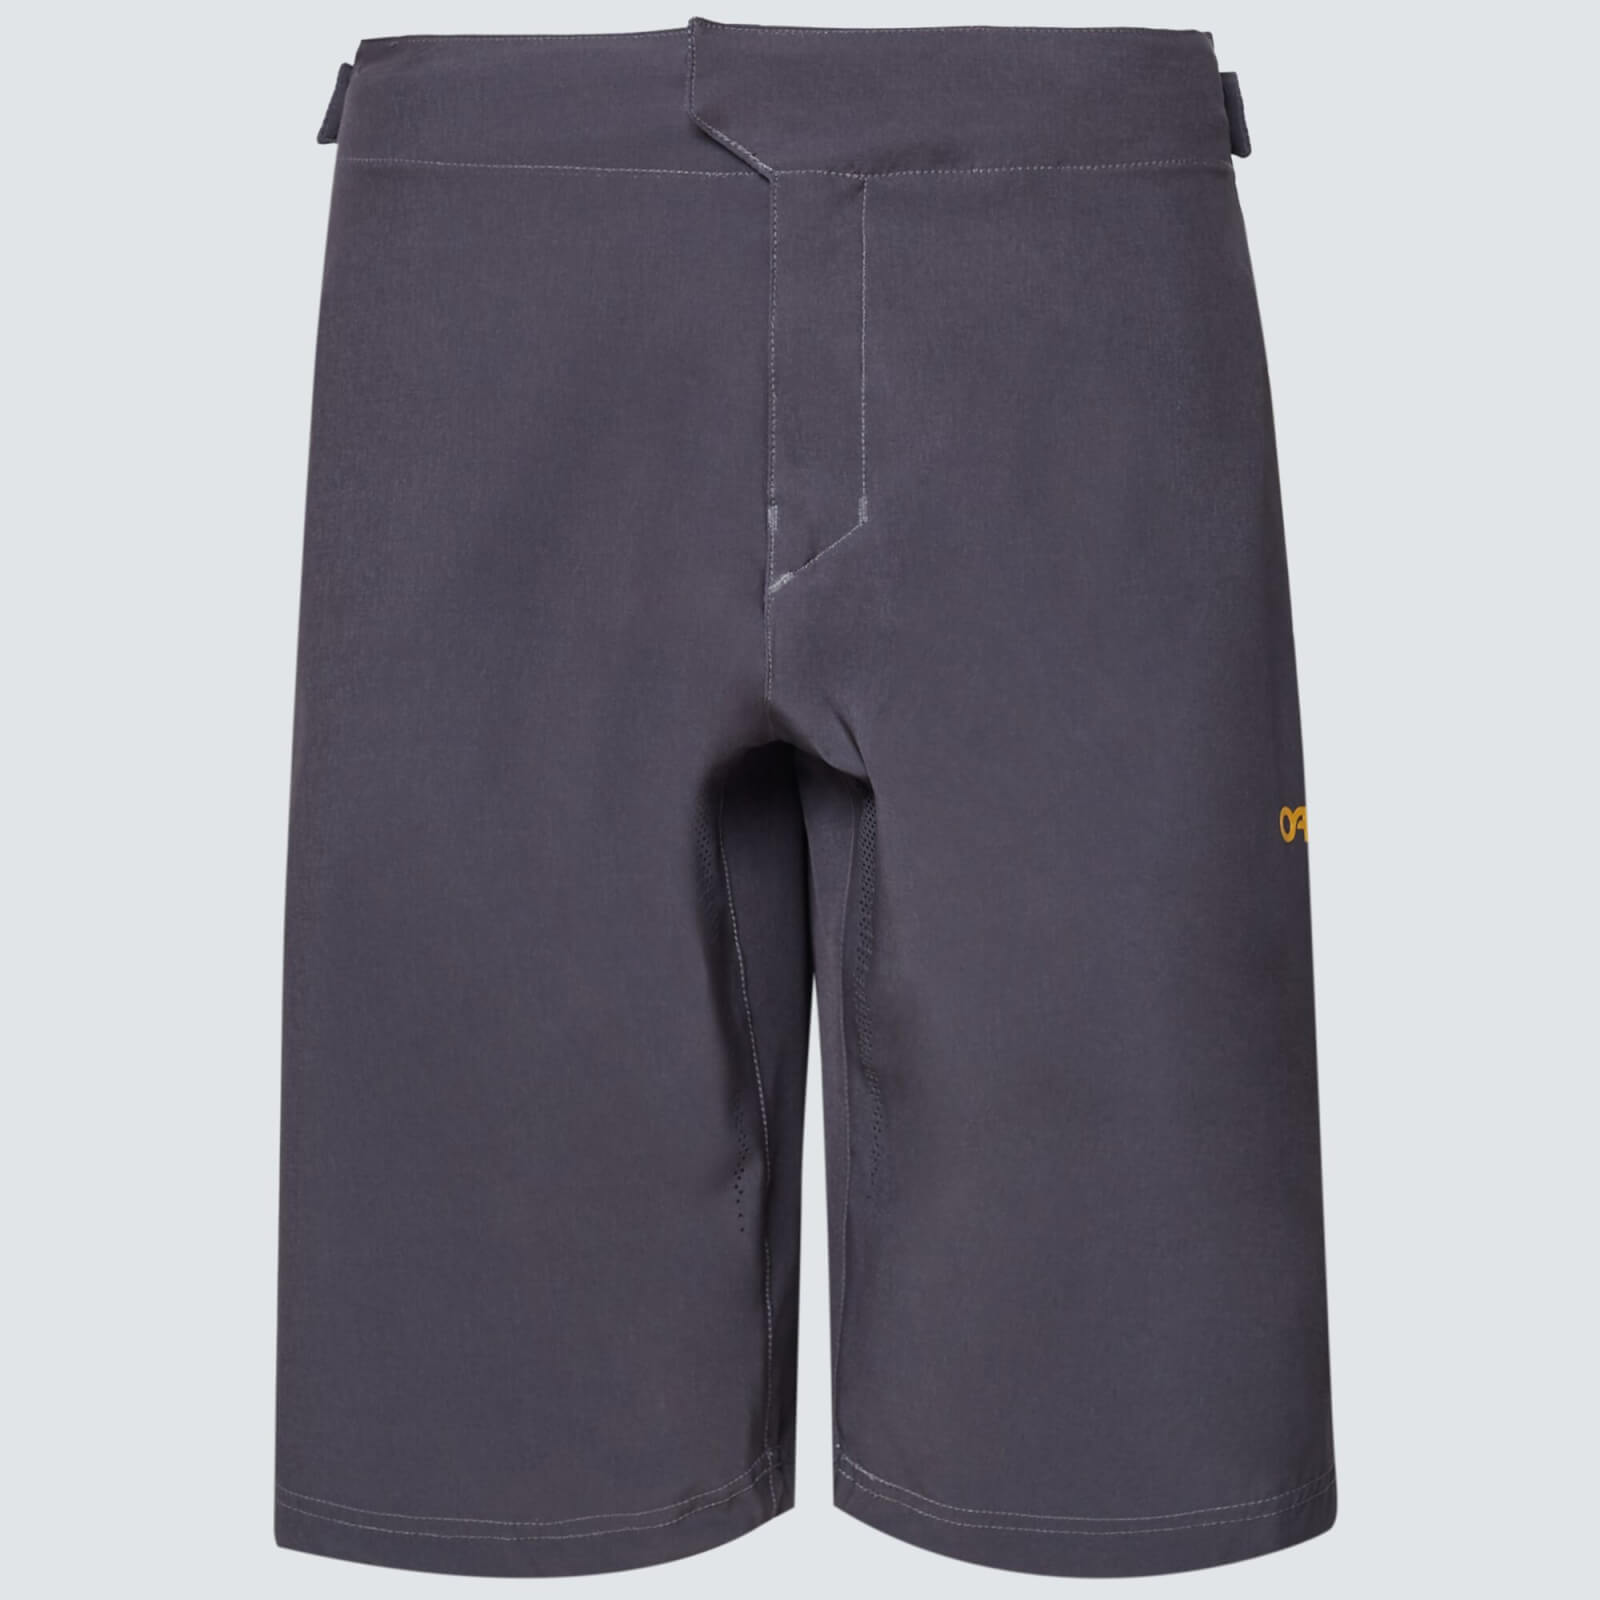 Oakley Reduct Berm Shorts - 34 - Forged Iron